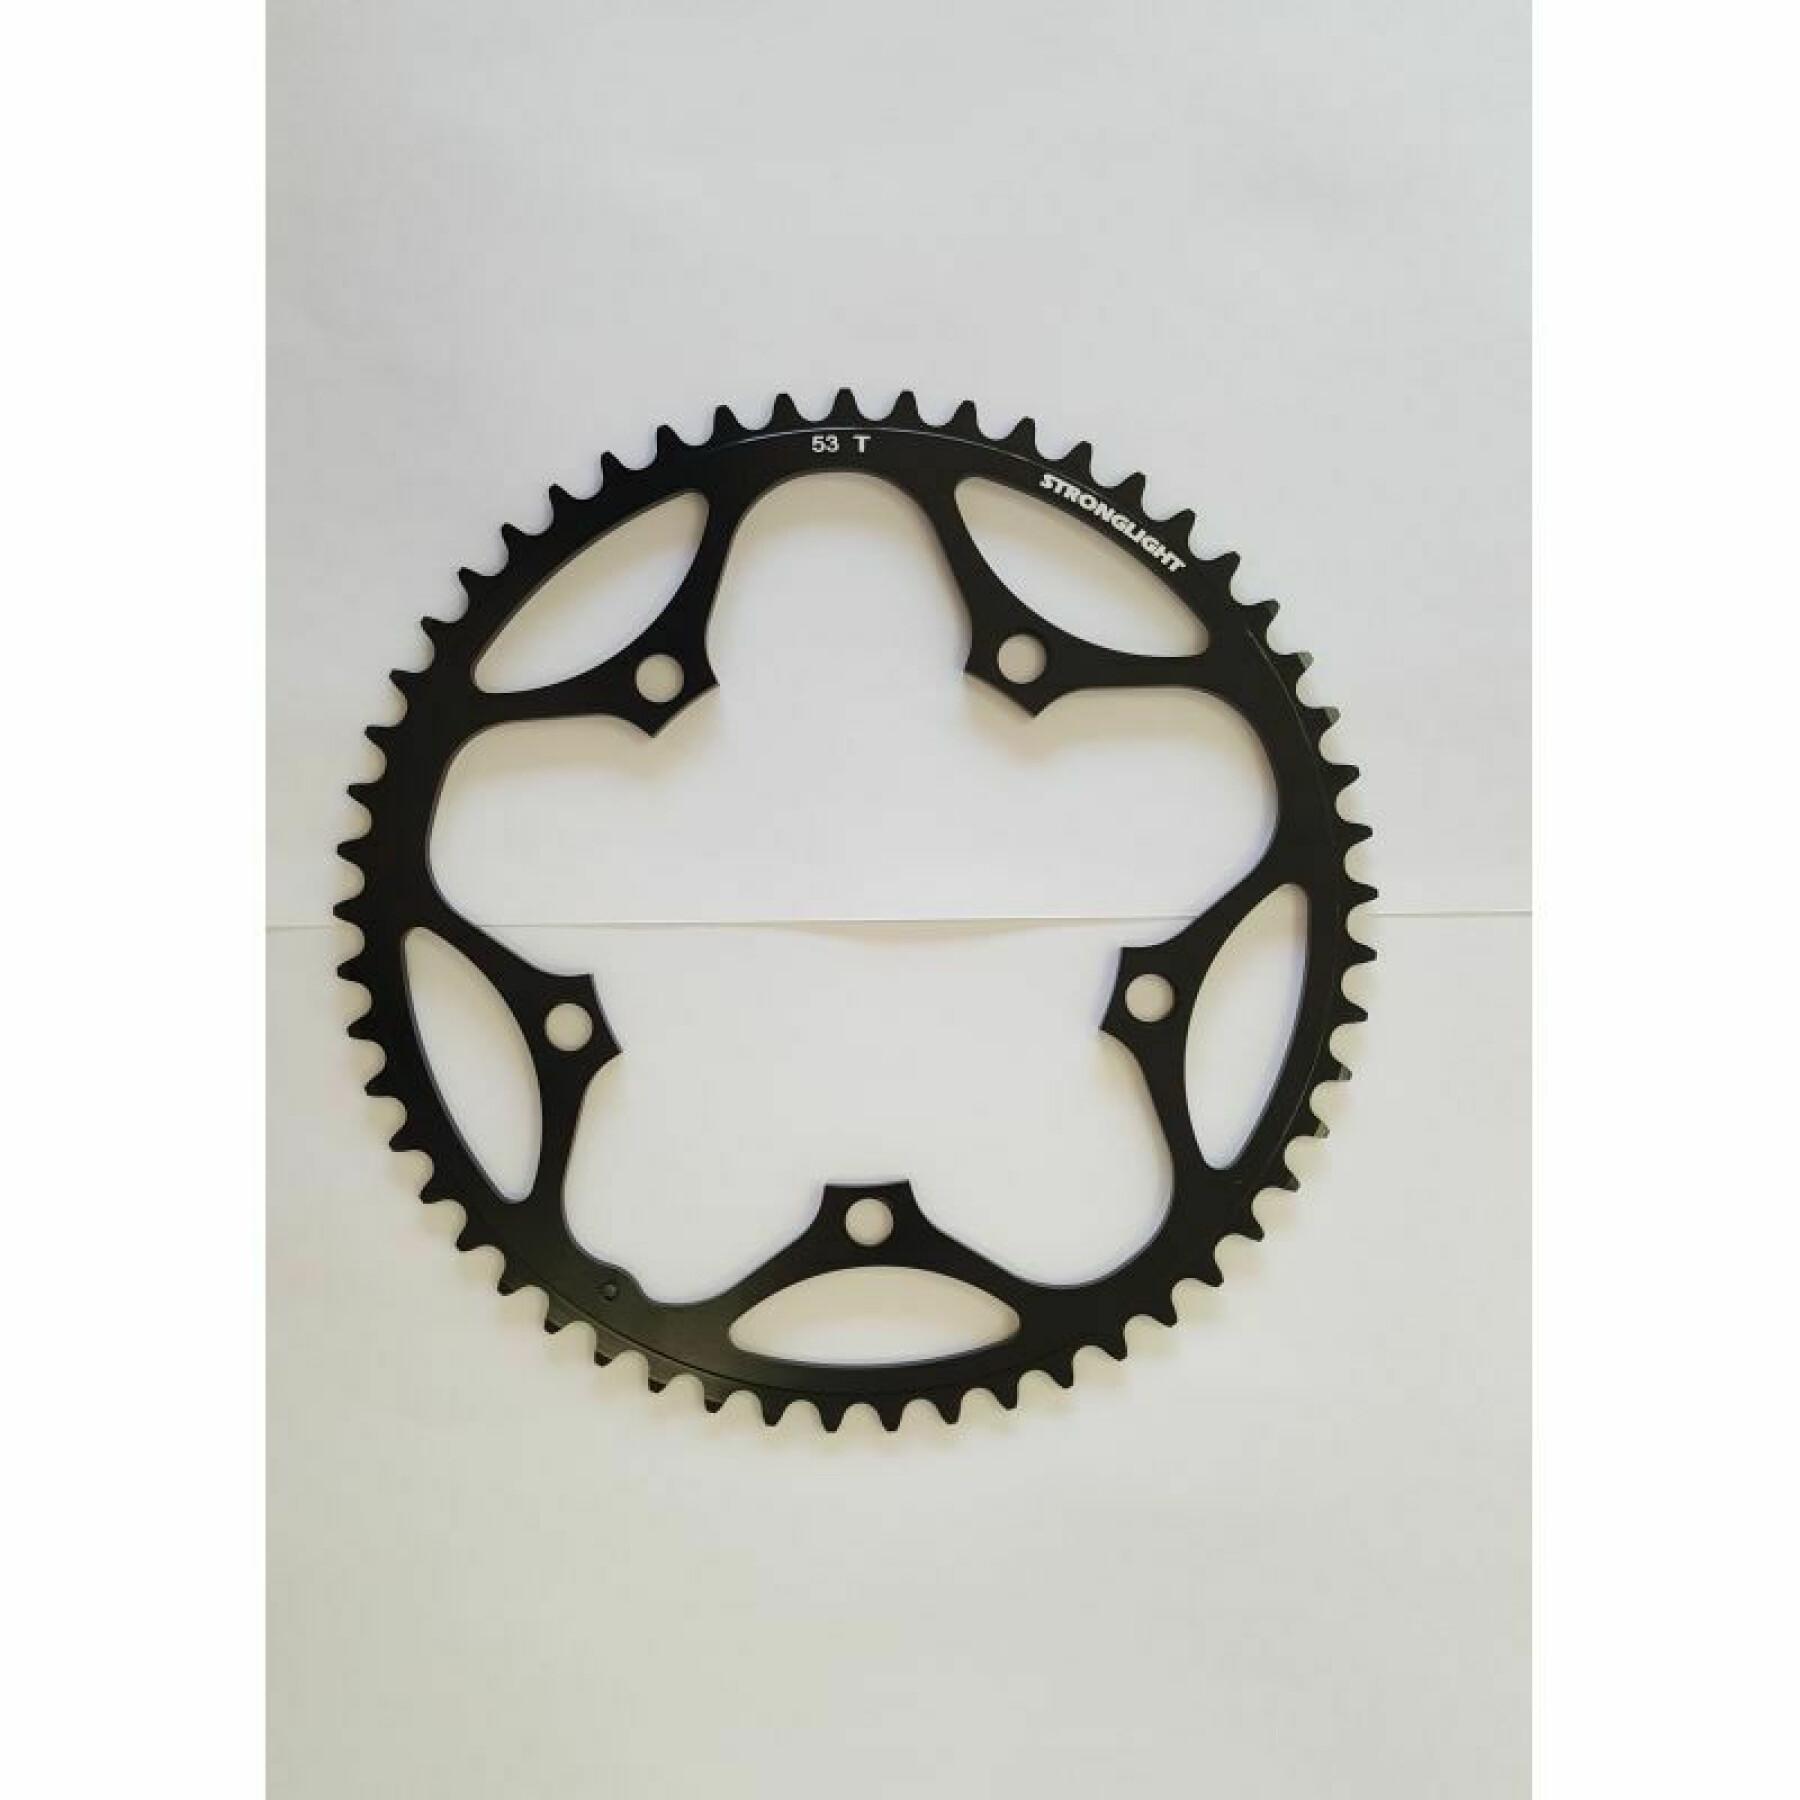 Dienblad Stronglight rz campagnolo 50T